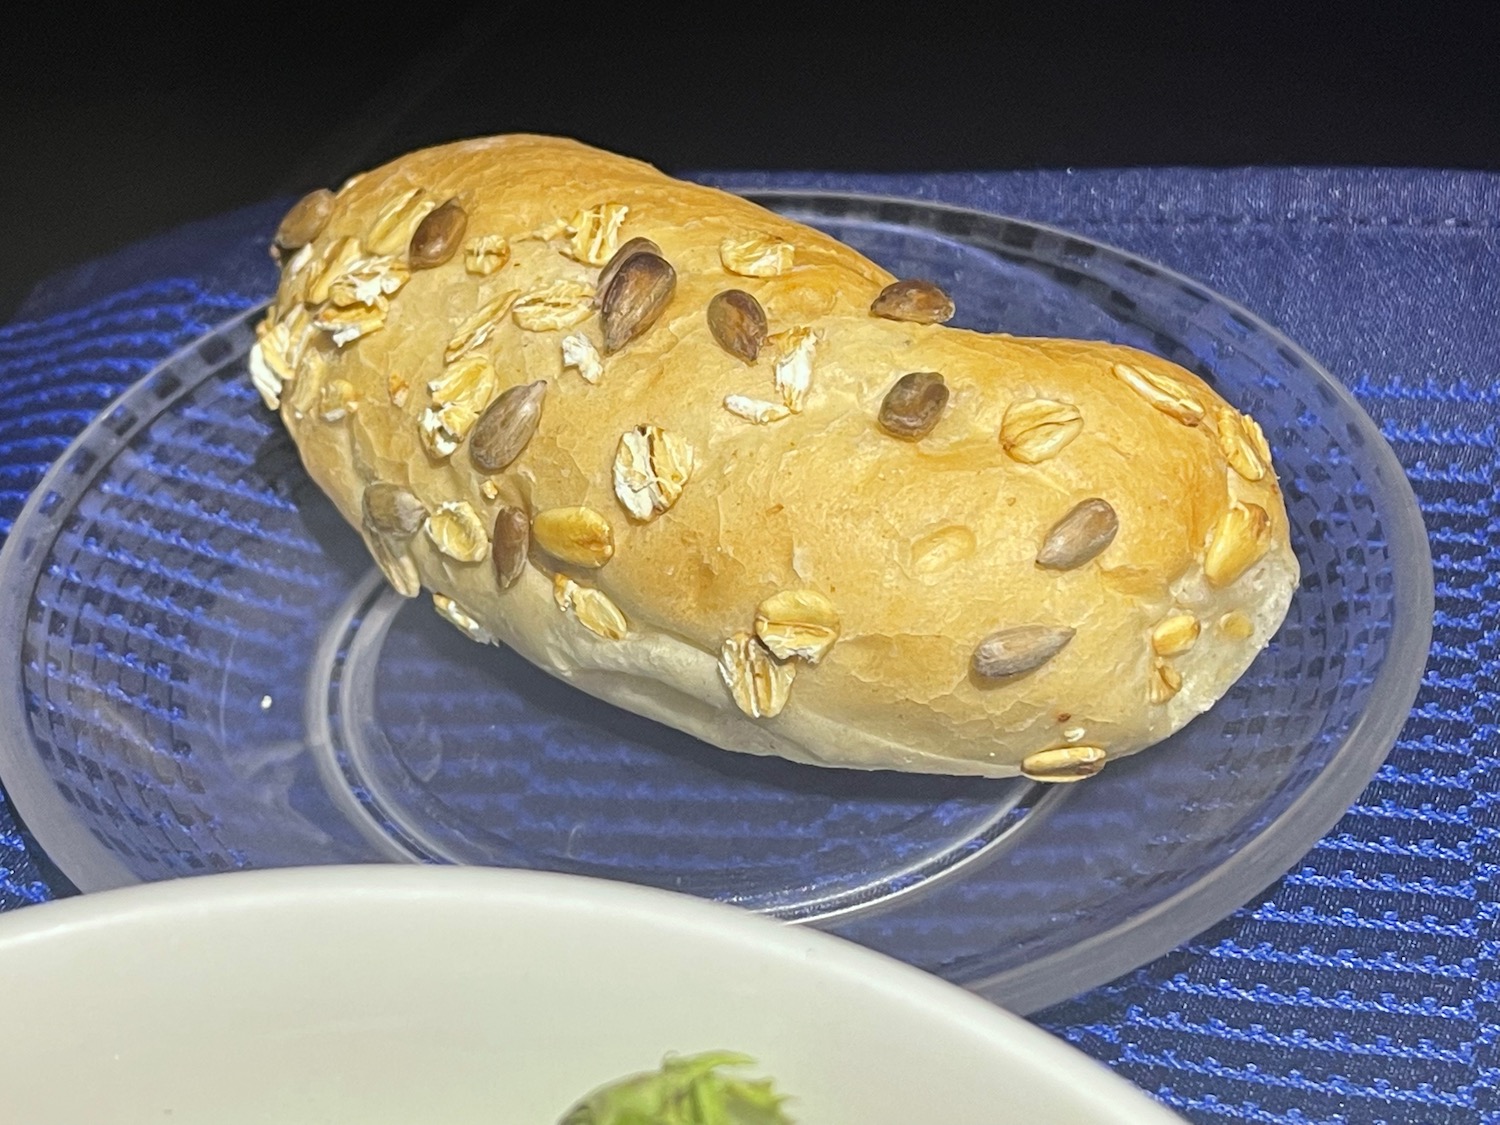 a loaf of bread with seeds on top of it